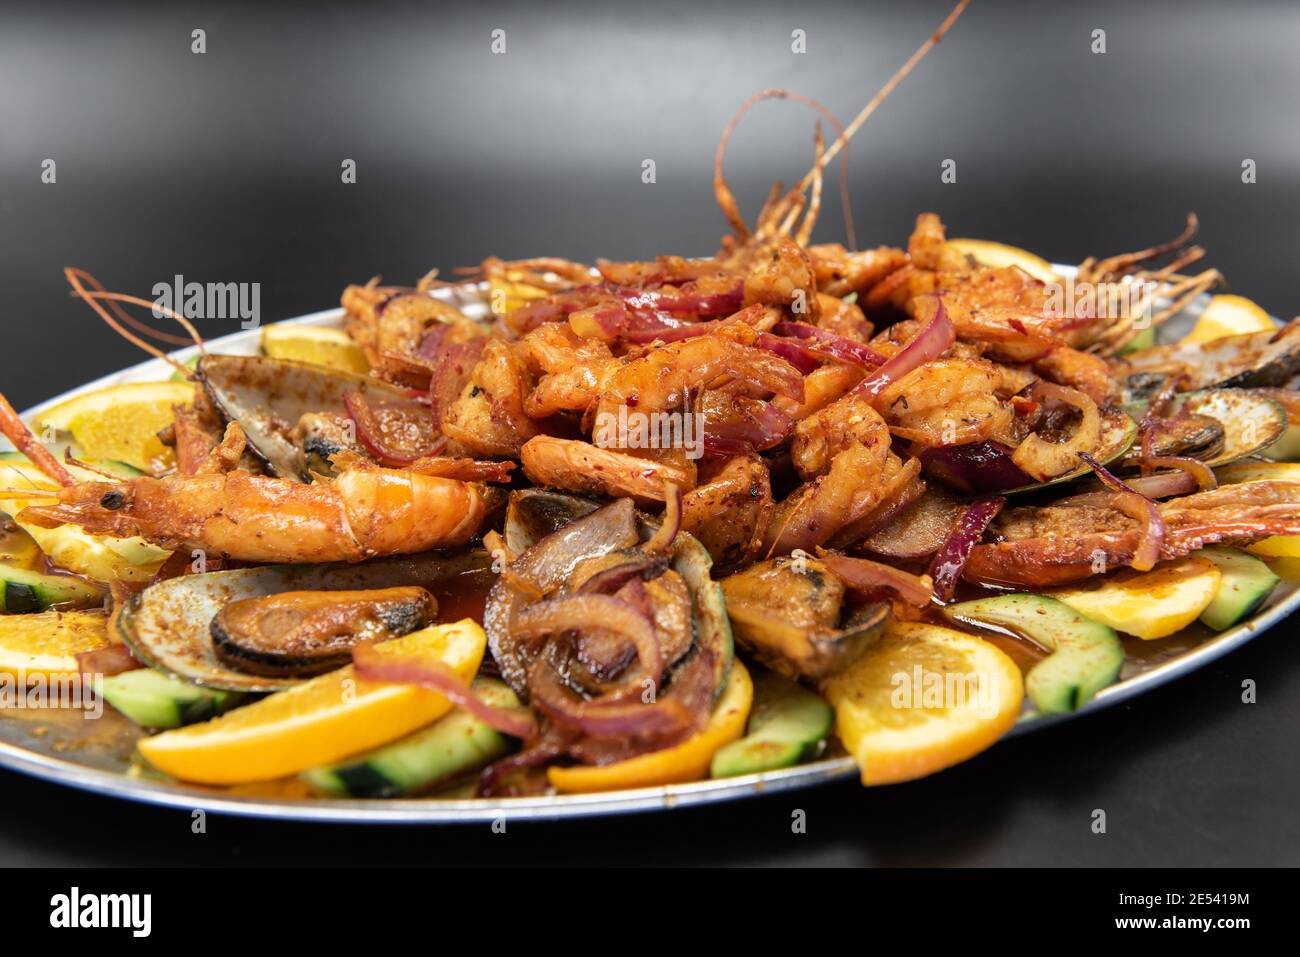 Large pile of spicy shrimp plate served over roasted vegetables and garnished with orange slices. Stock Photo